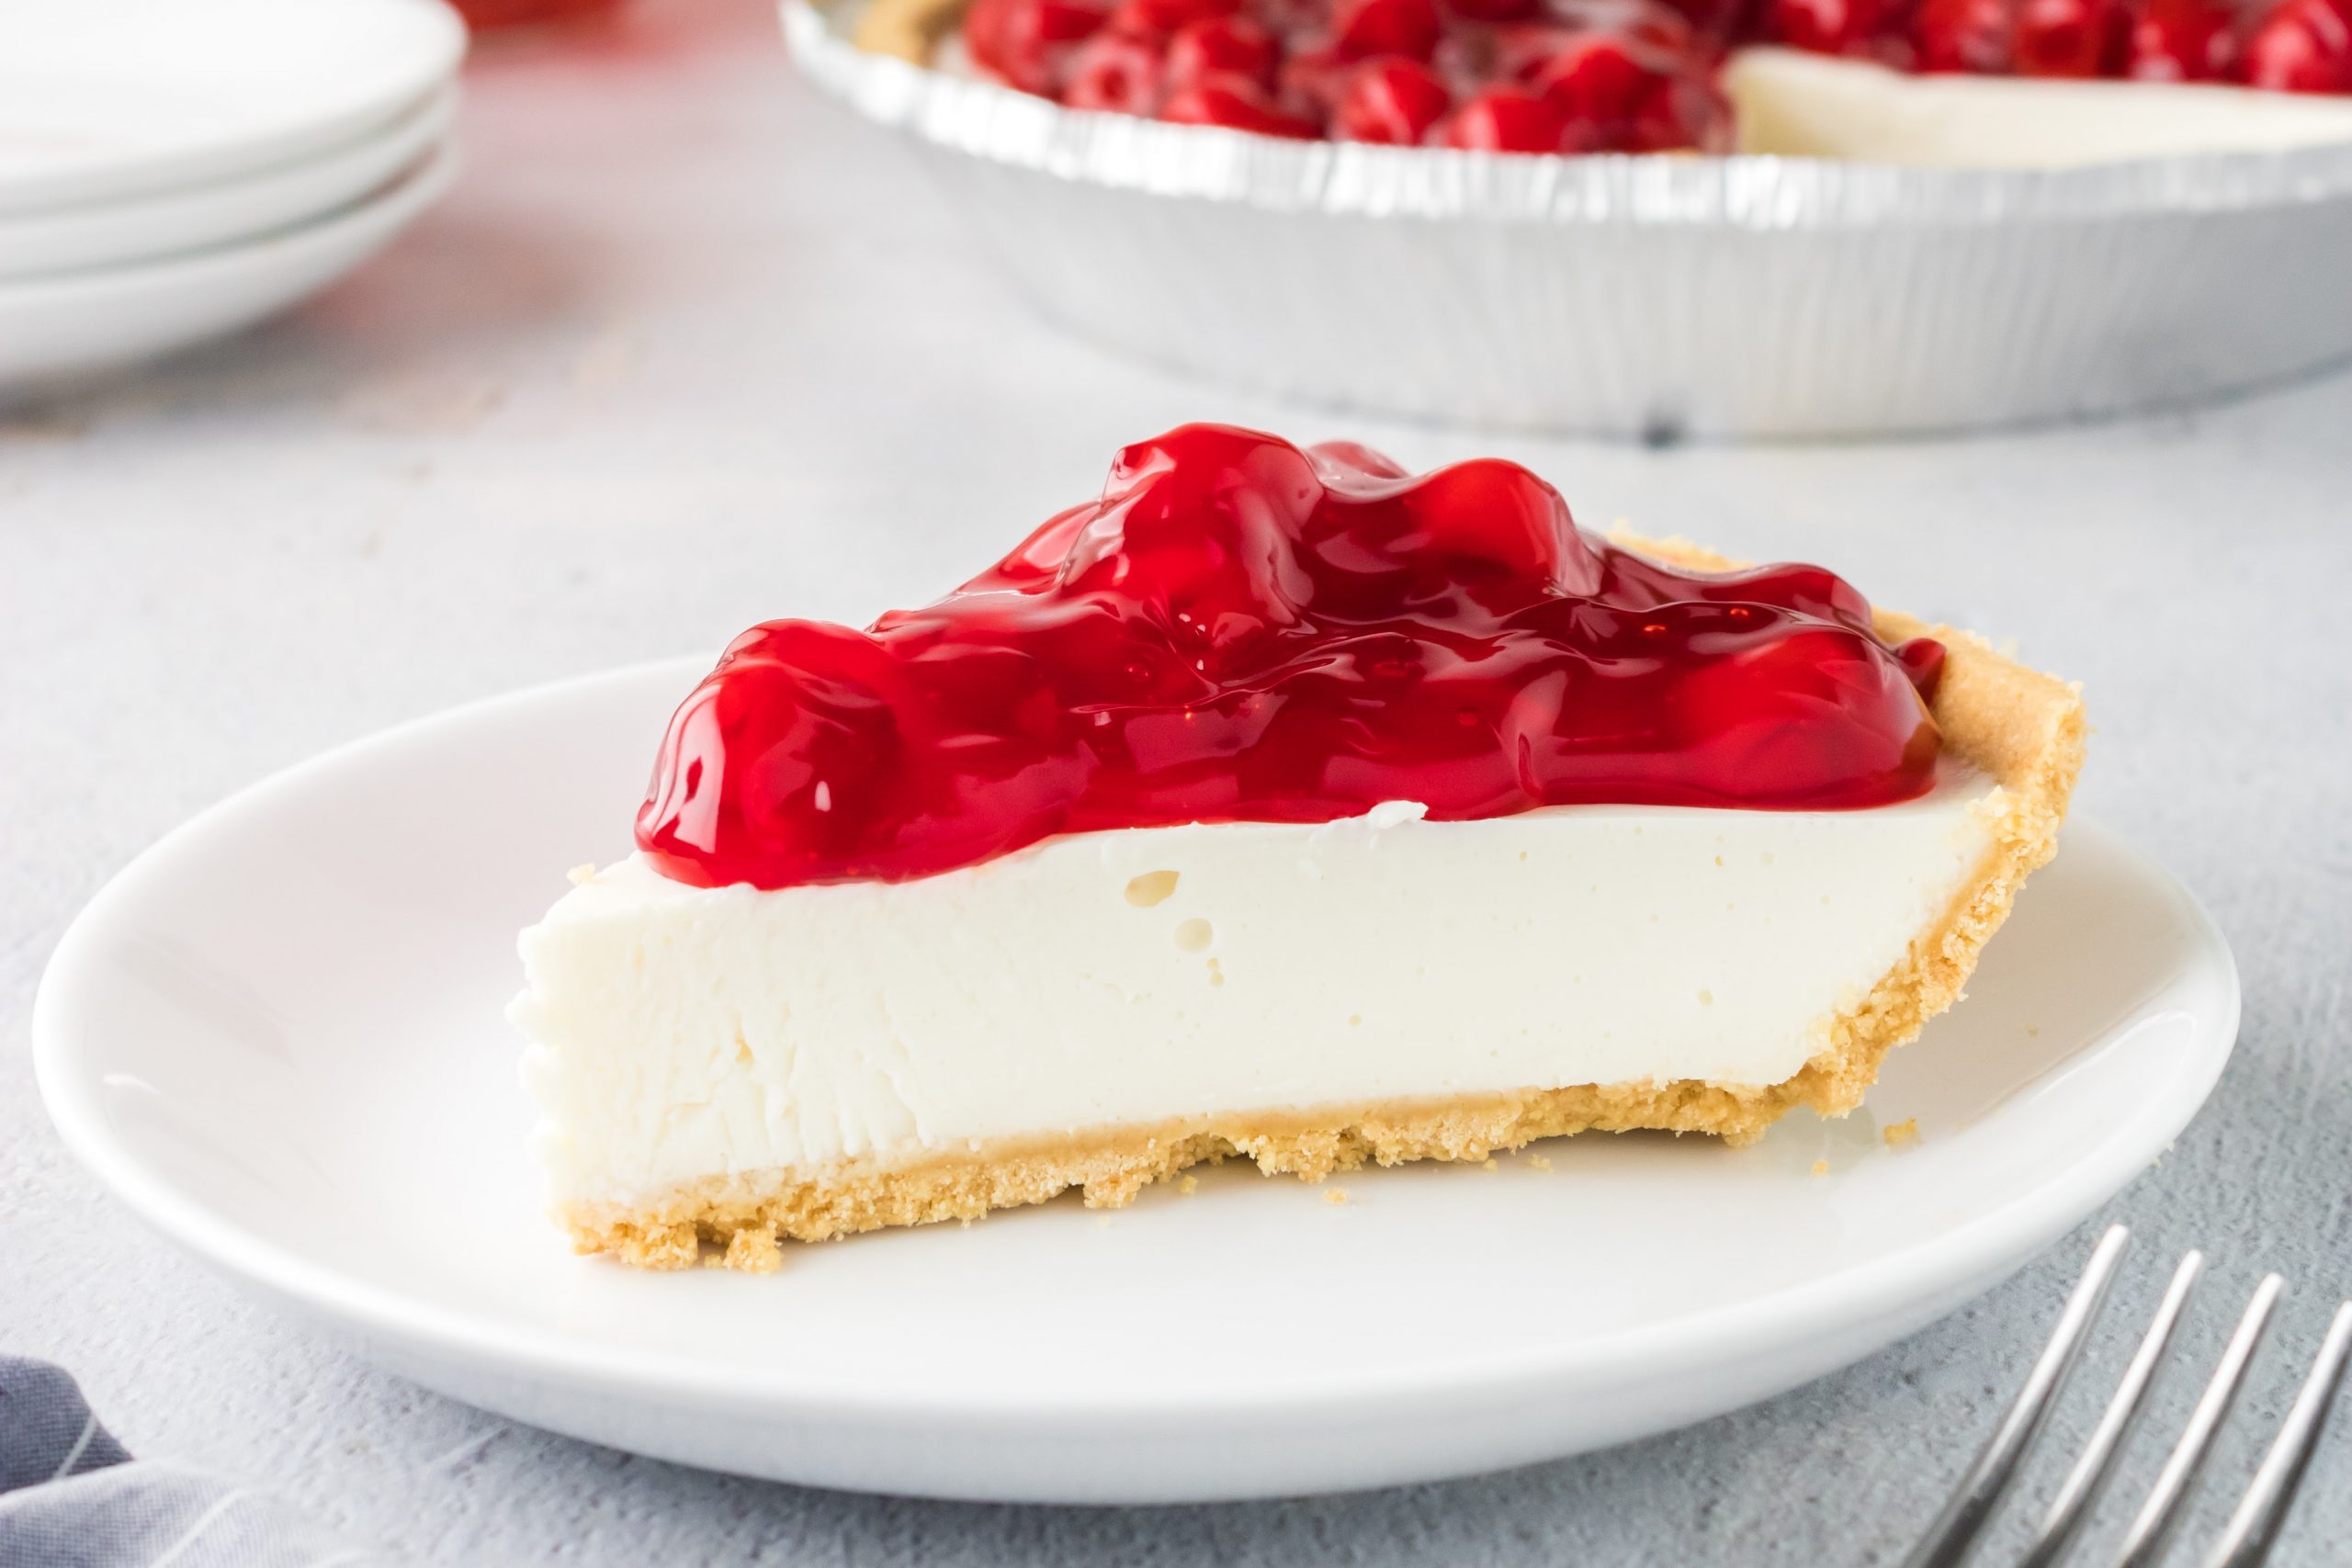 Jam als topping op proteïne cheesecake